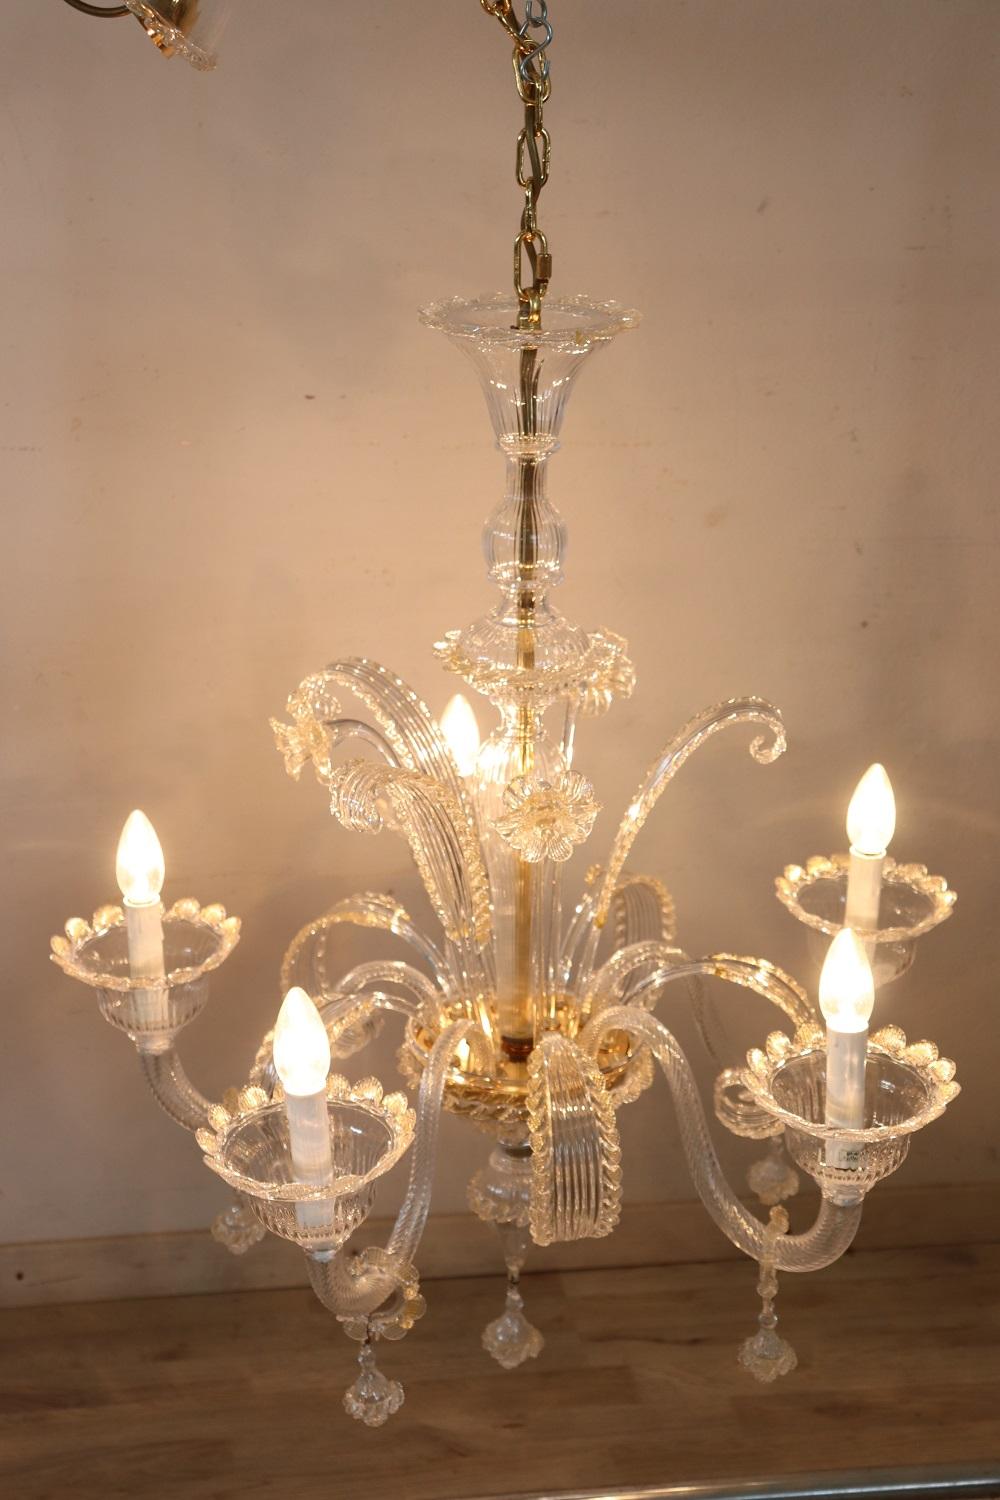 Beautiful and refined Italian 1980s Murano glass chandelier with five bulbs. The glass is clear with some gold powder decorations. This chandelier is characterized by extreme elegance and refinement, a multitude of flowers that stand out like a